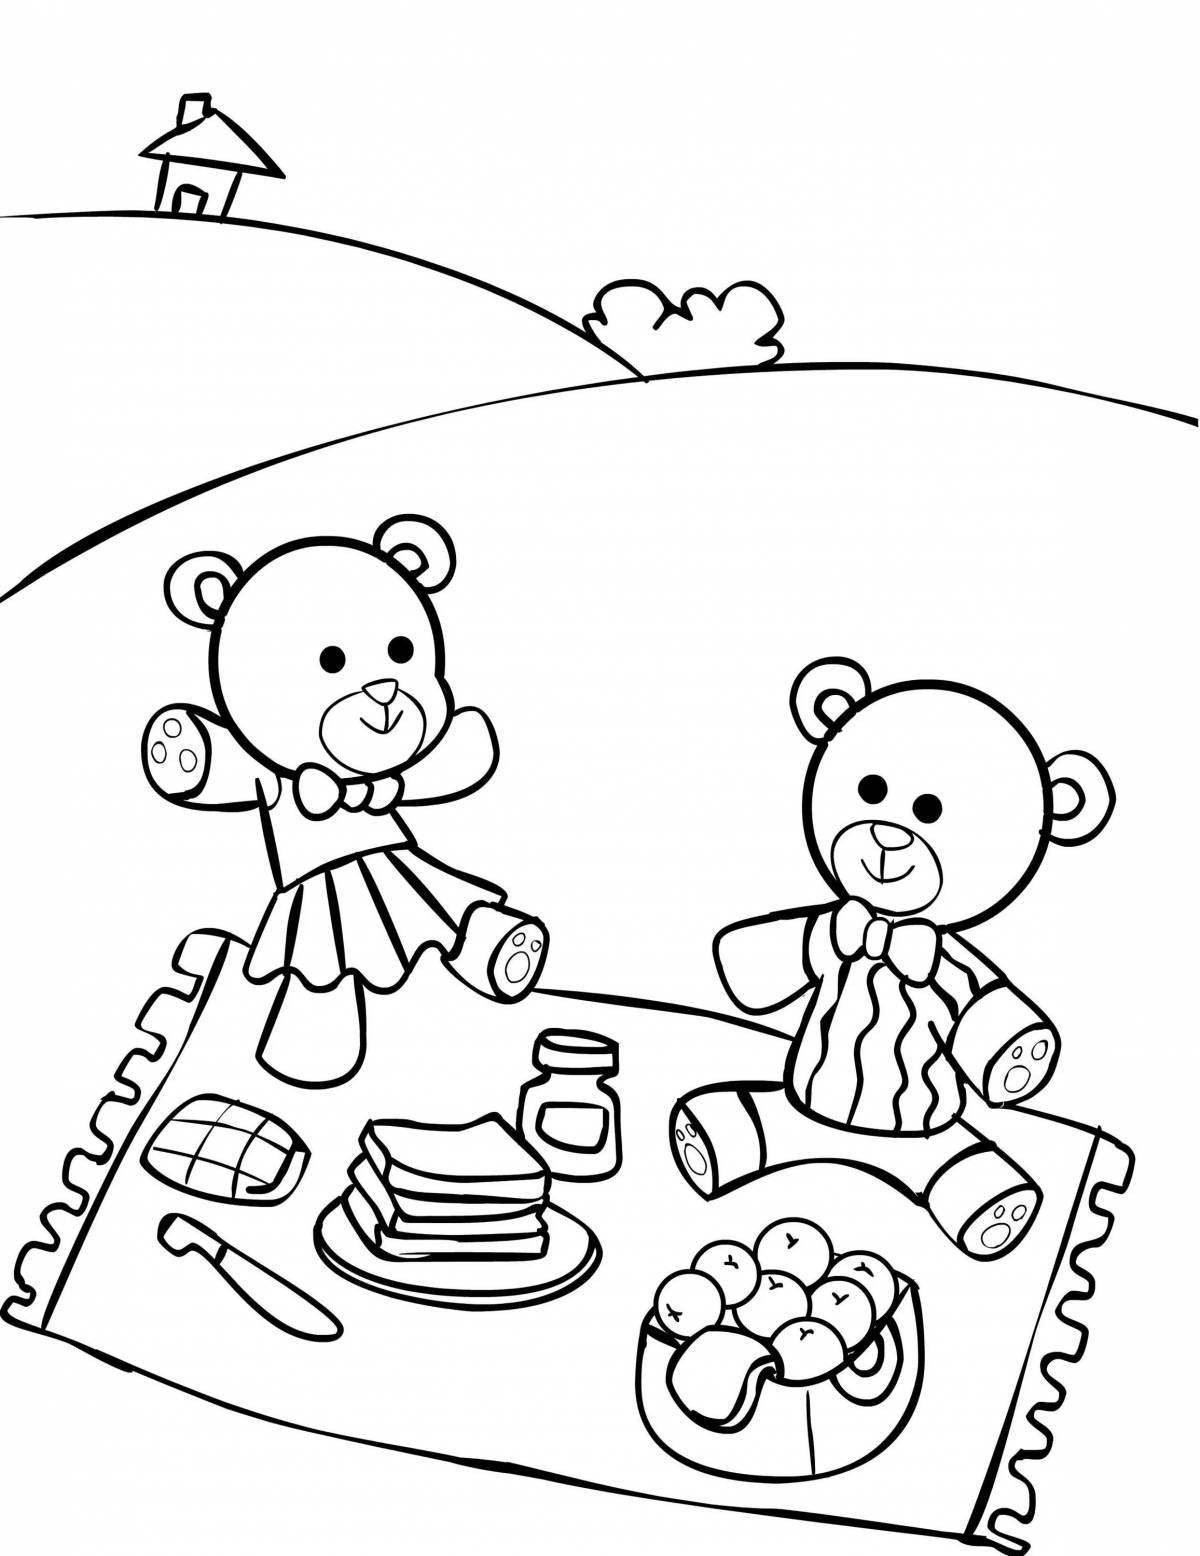 Exciting bear coloring book